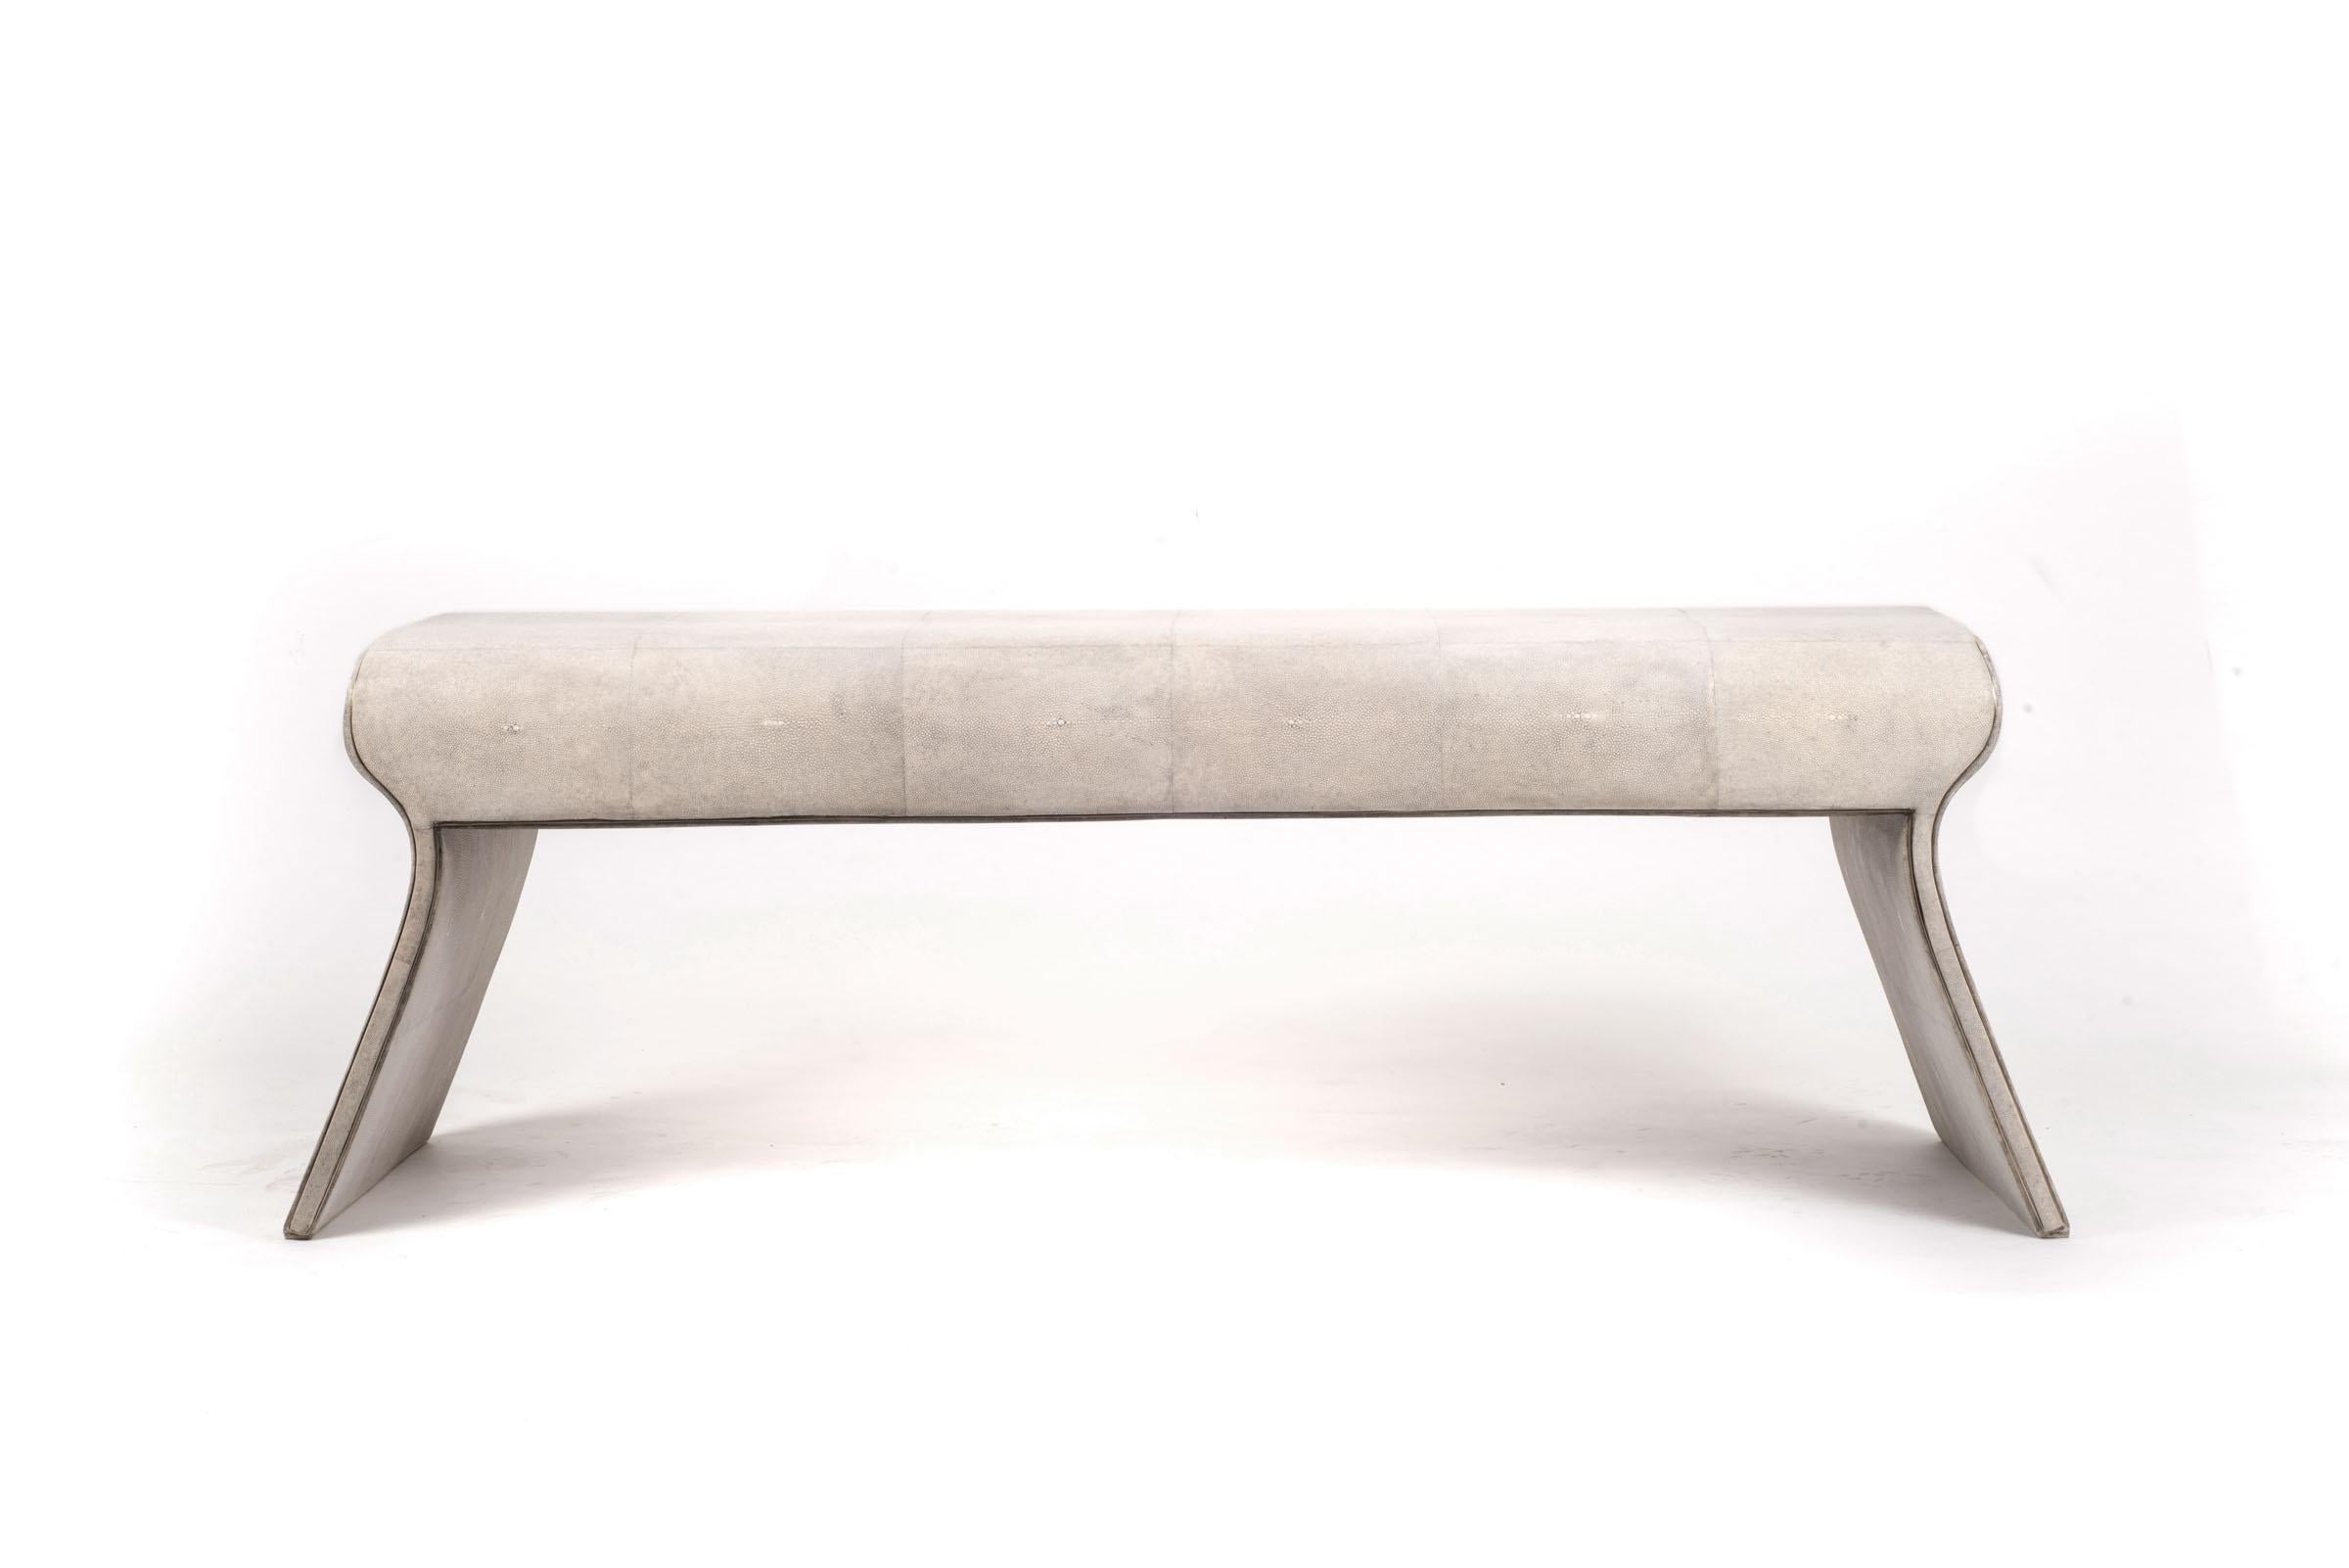 The Dandy day bench is the ultimate luxury seating. Completely covered in cream shagreen except for a subtle metal inset frame around the bench that adds another dimension to the piece. Upholstery available on request. This piece is designed by the